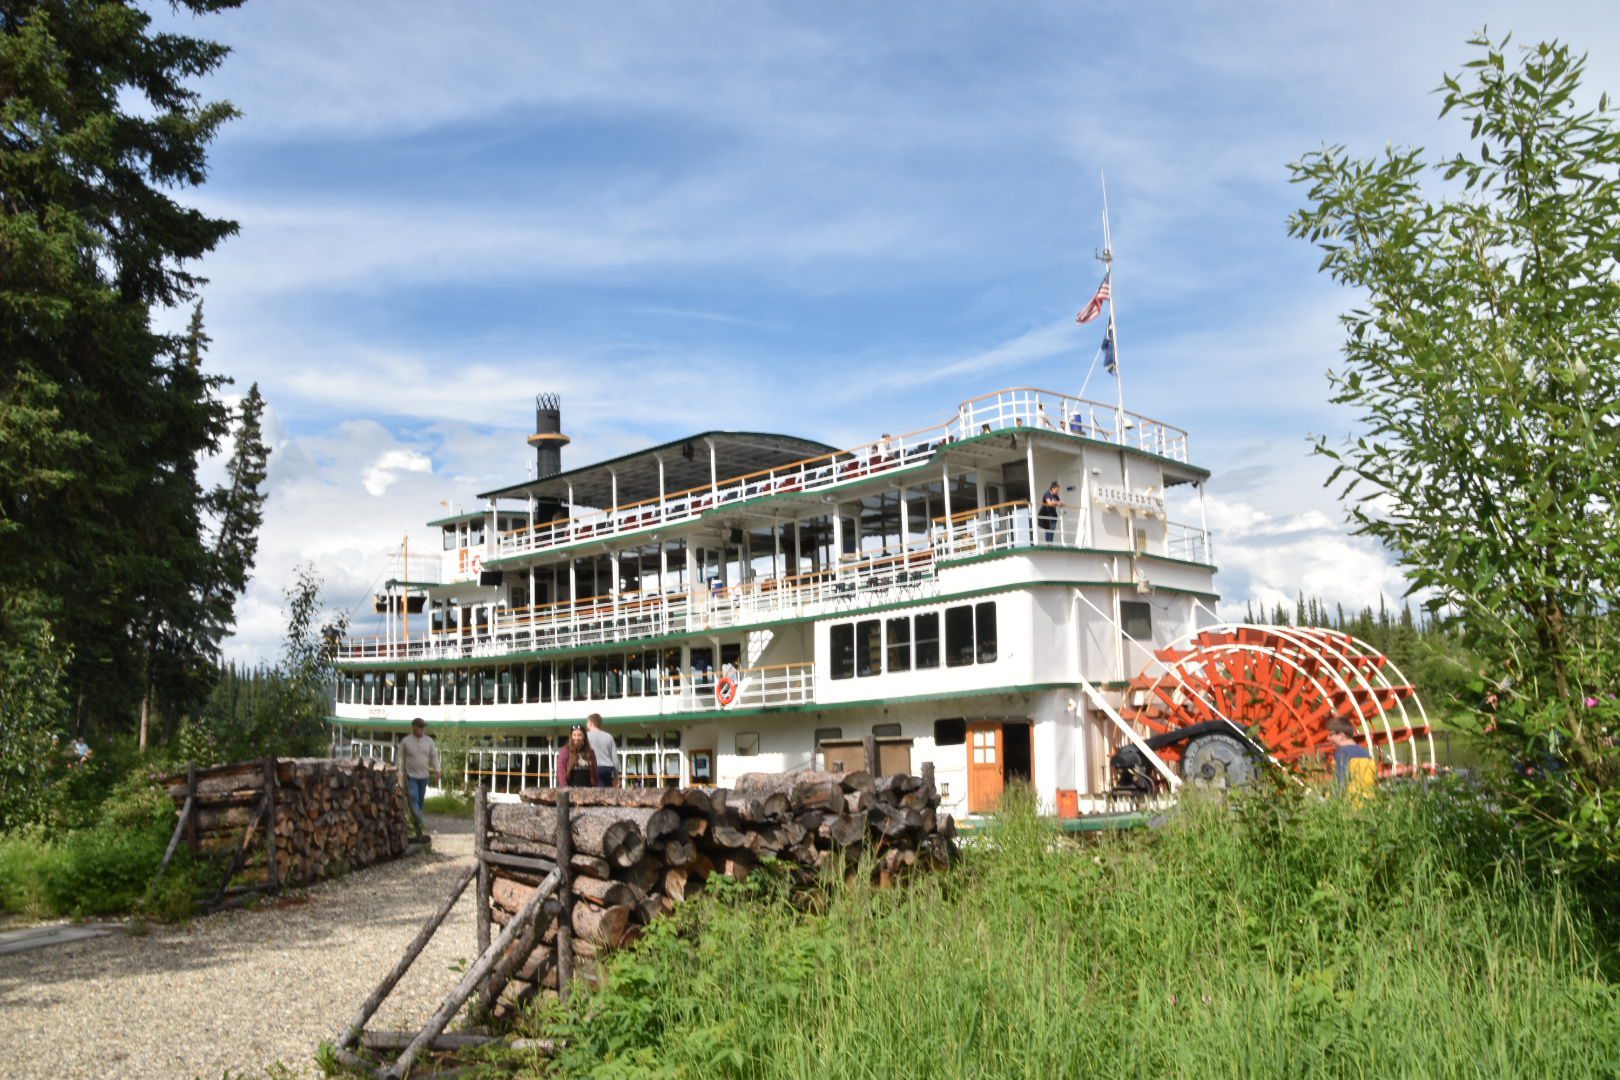 things to do in Fairbanks Alaska - Riverboat Discovery